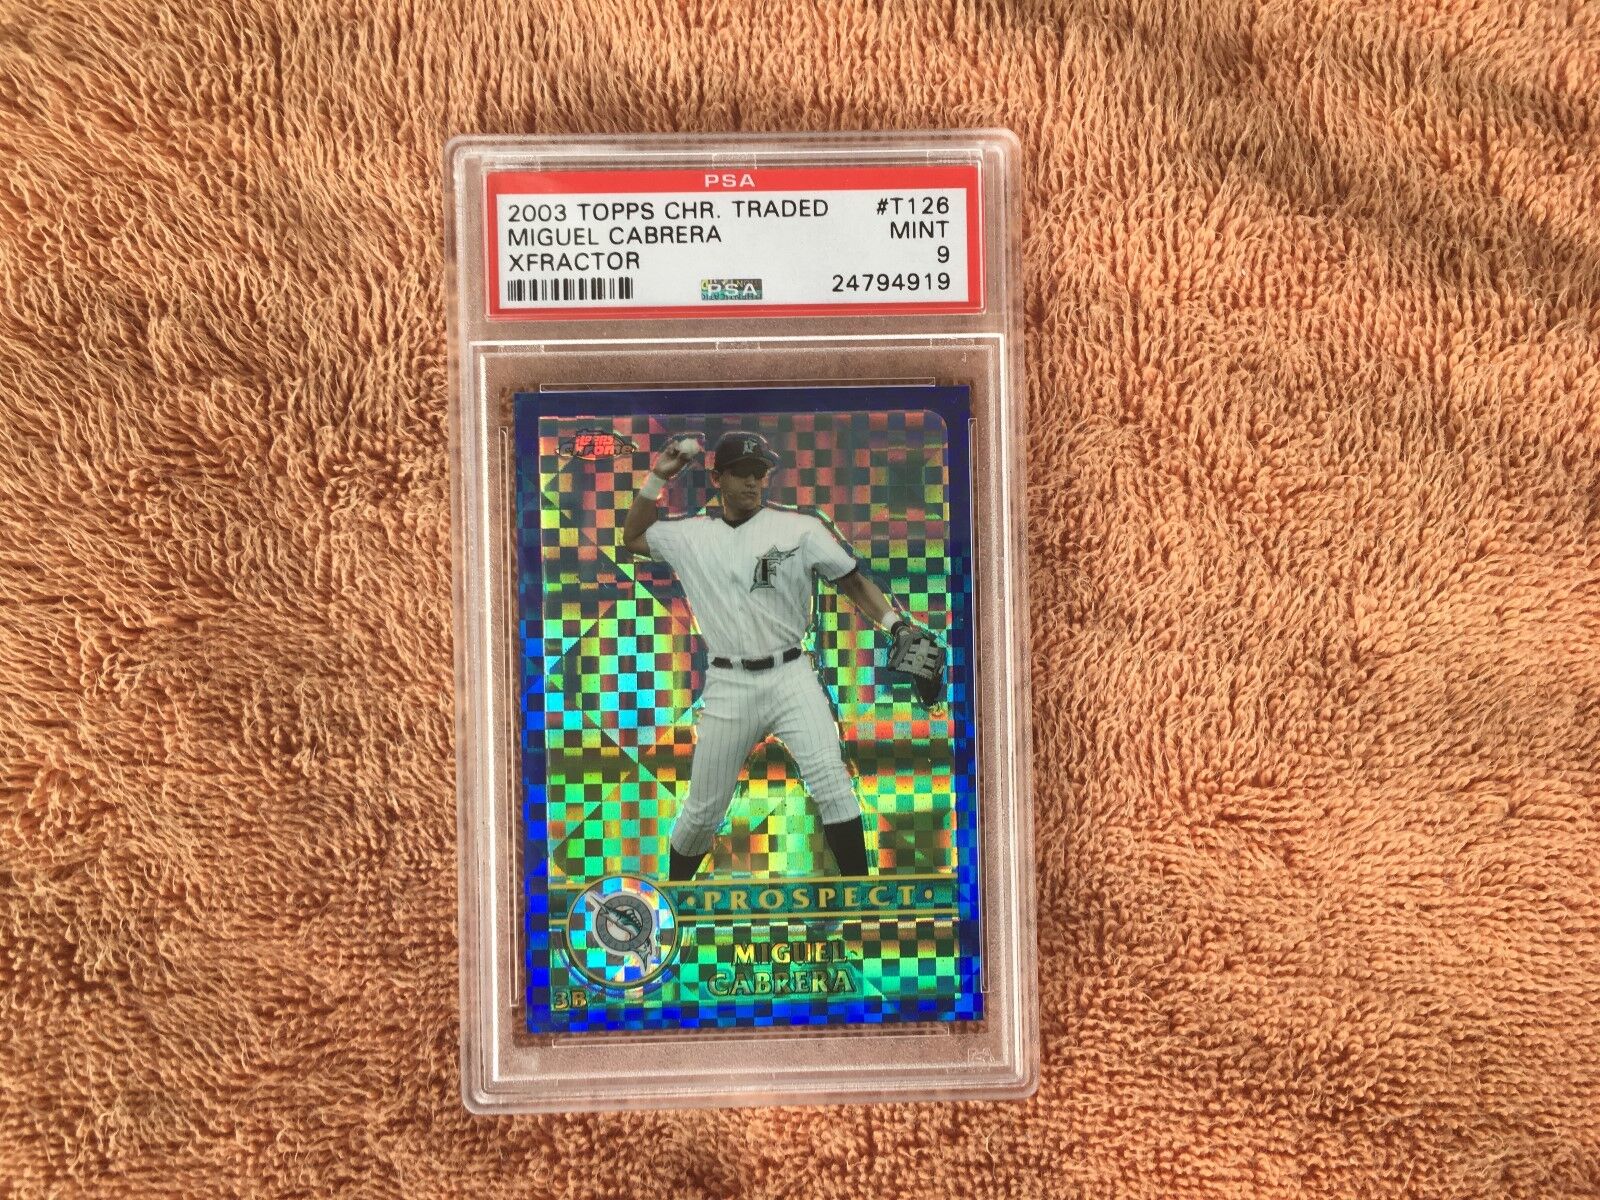 2003 TOPPS MIGUEL CABRERA CHROME XFRACTOR ROOKIE  16/25 PSA 9 POP 4 NONE HIGHER